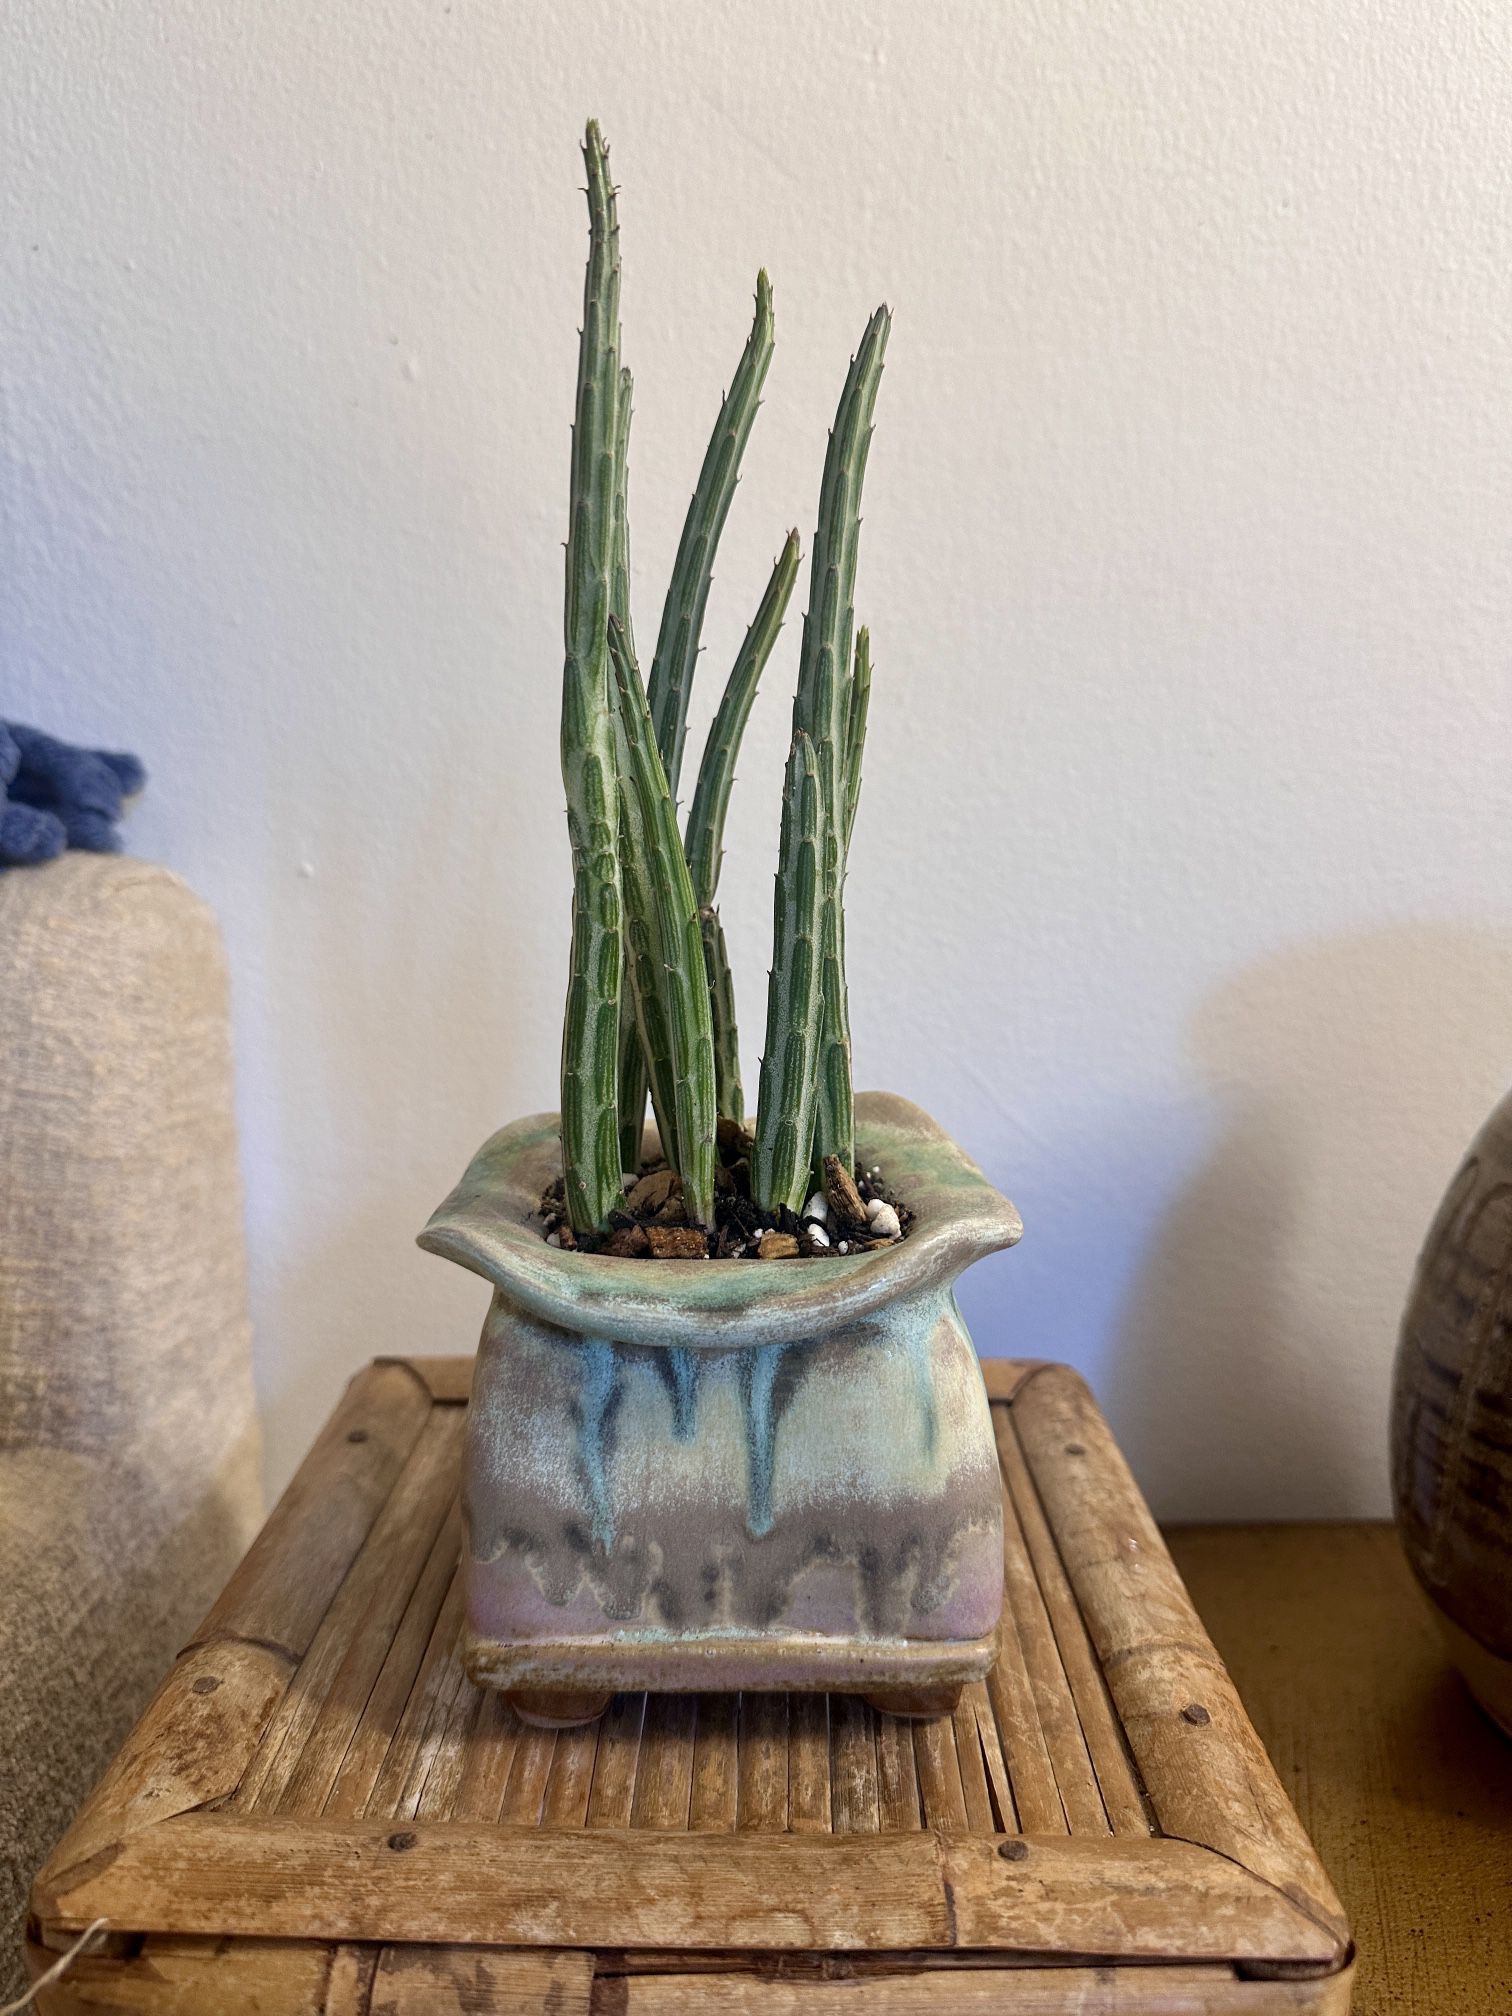 Pickle Plant Succulent In Handmade “Psychedelic” Planter Pot